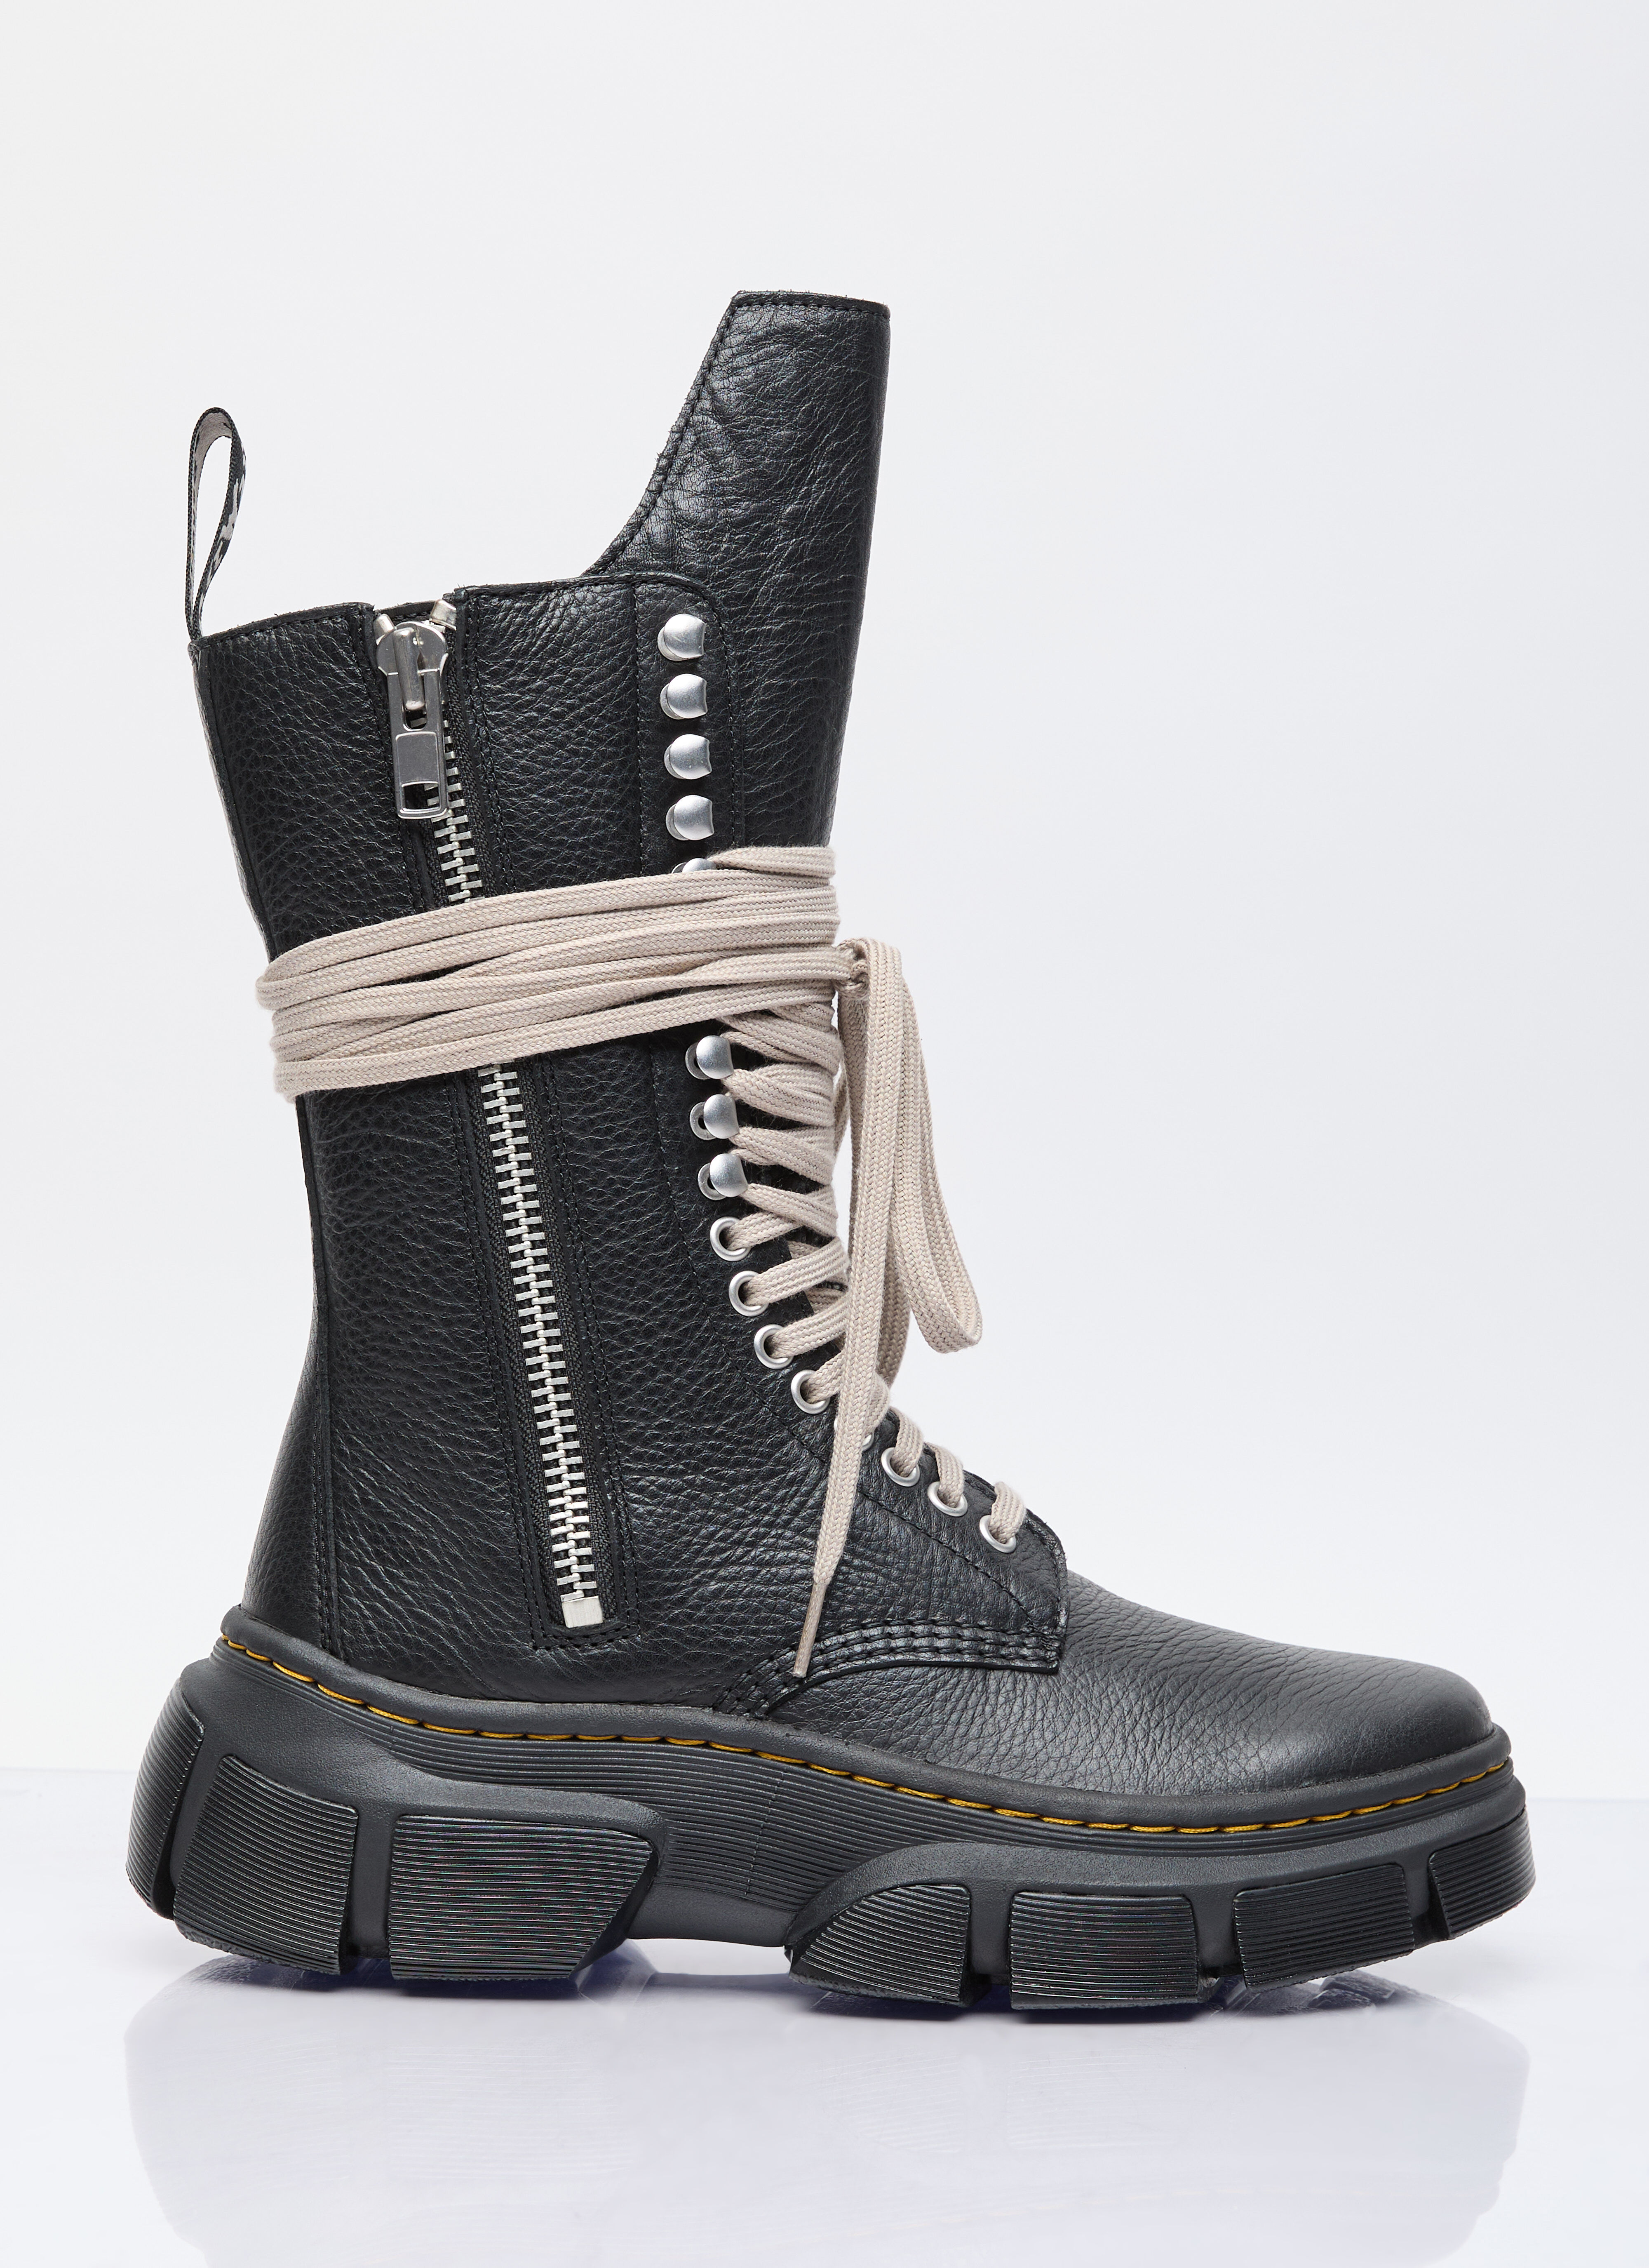 Rick Owens x Dr. Martens Collab: High Laced Boots for Men | LN-CC®